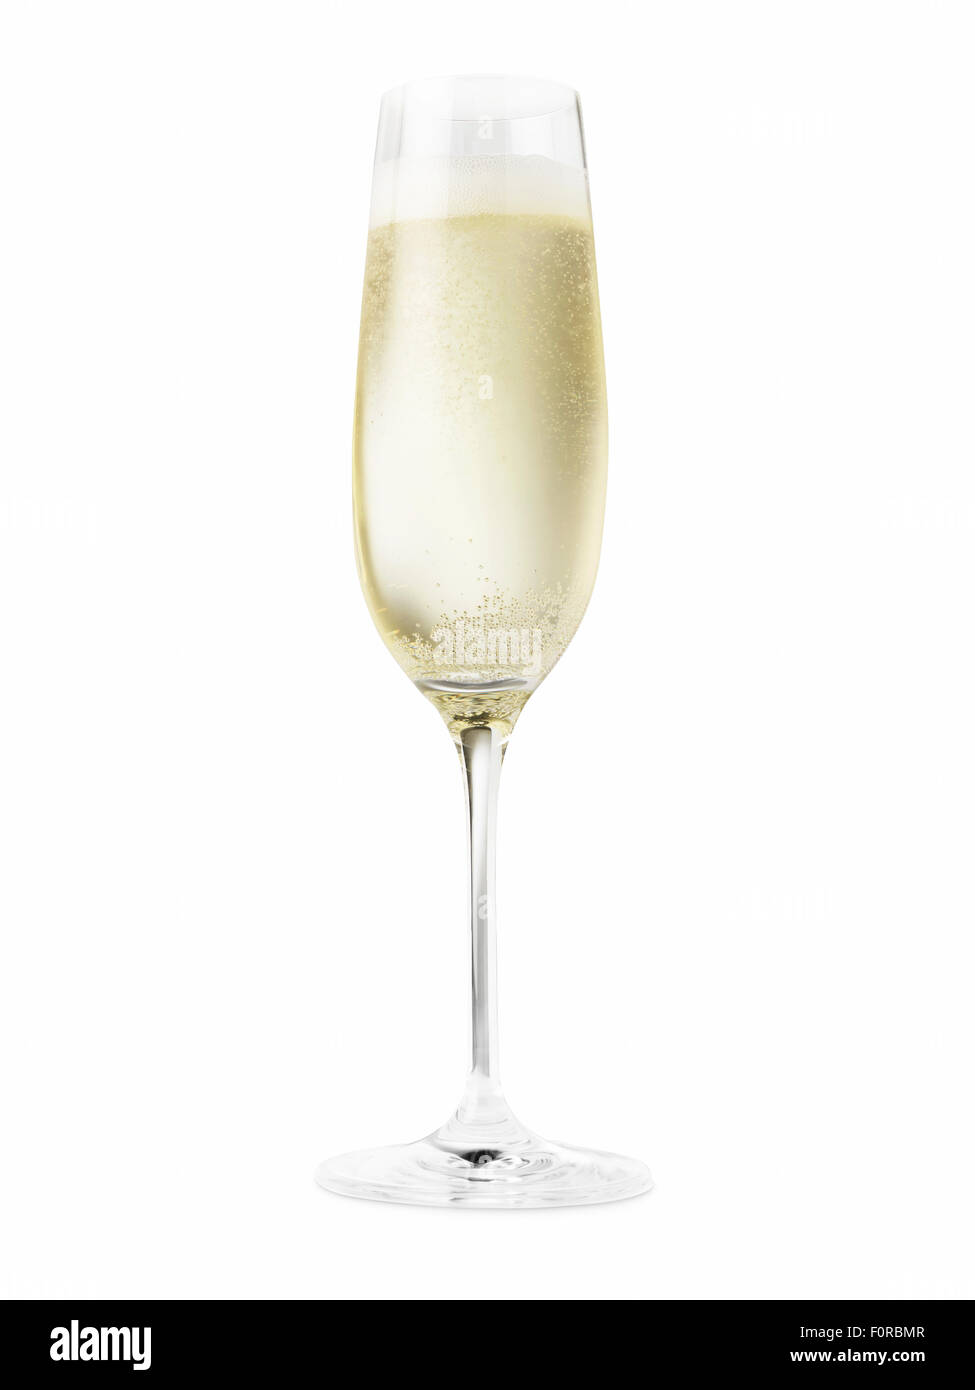 Shot of a champagne glass full of champagne cut out on a white background. The chilled nature of the liquid has given the appear Stock Photo